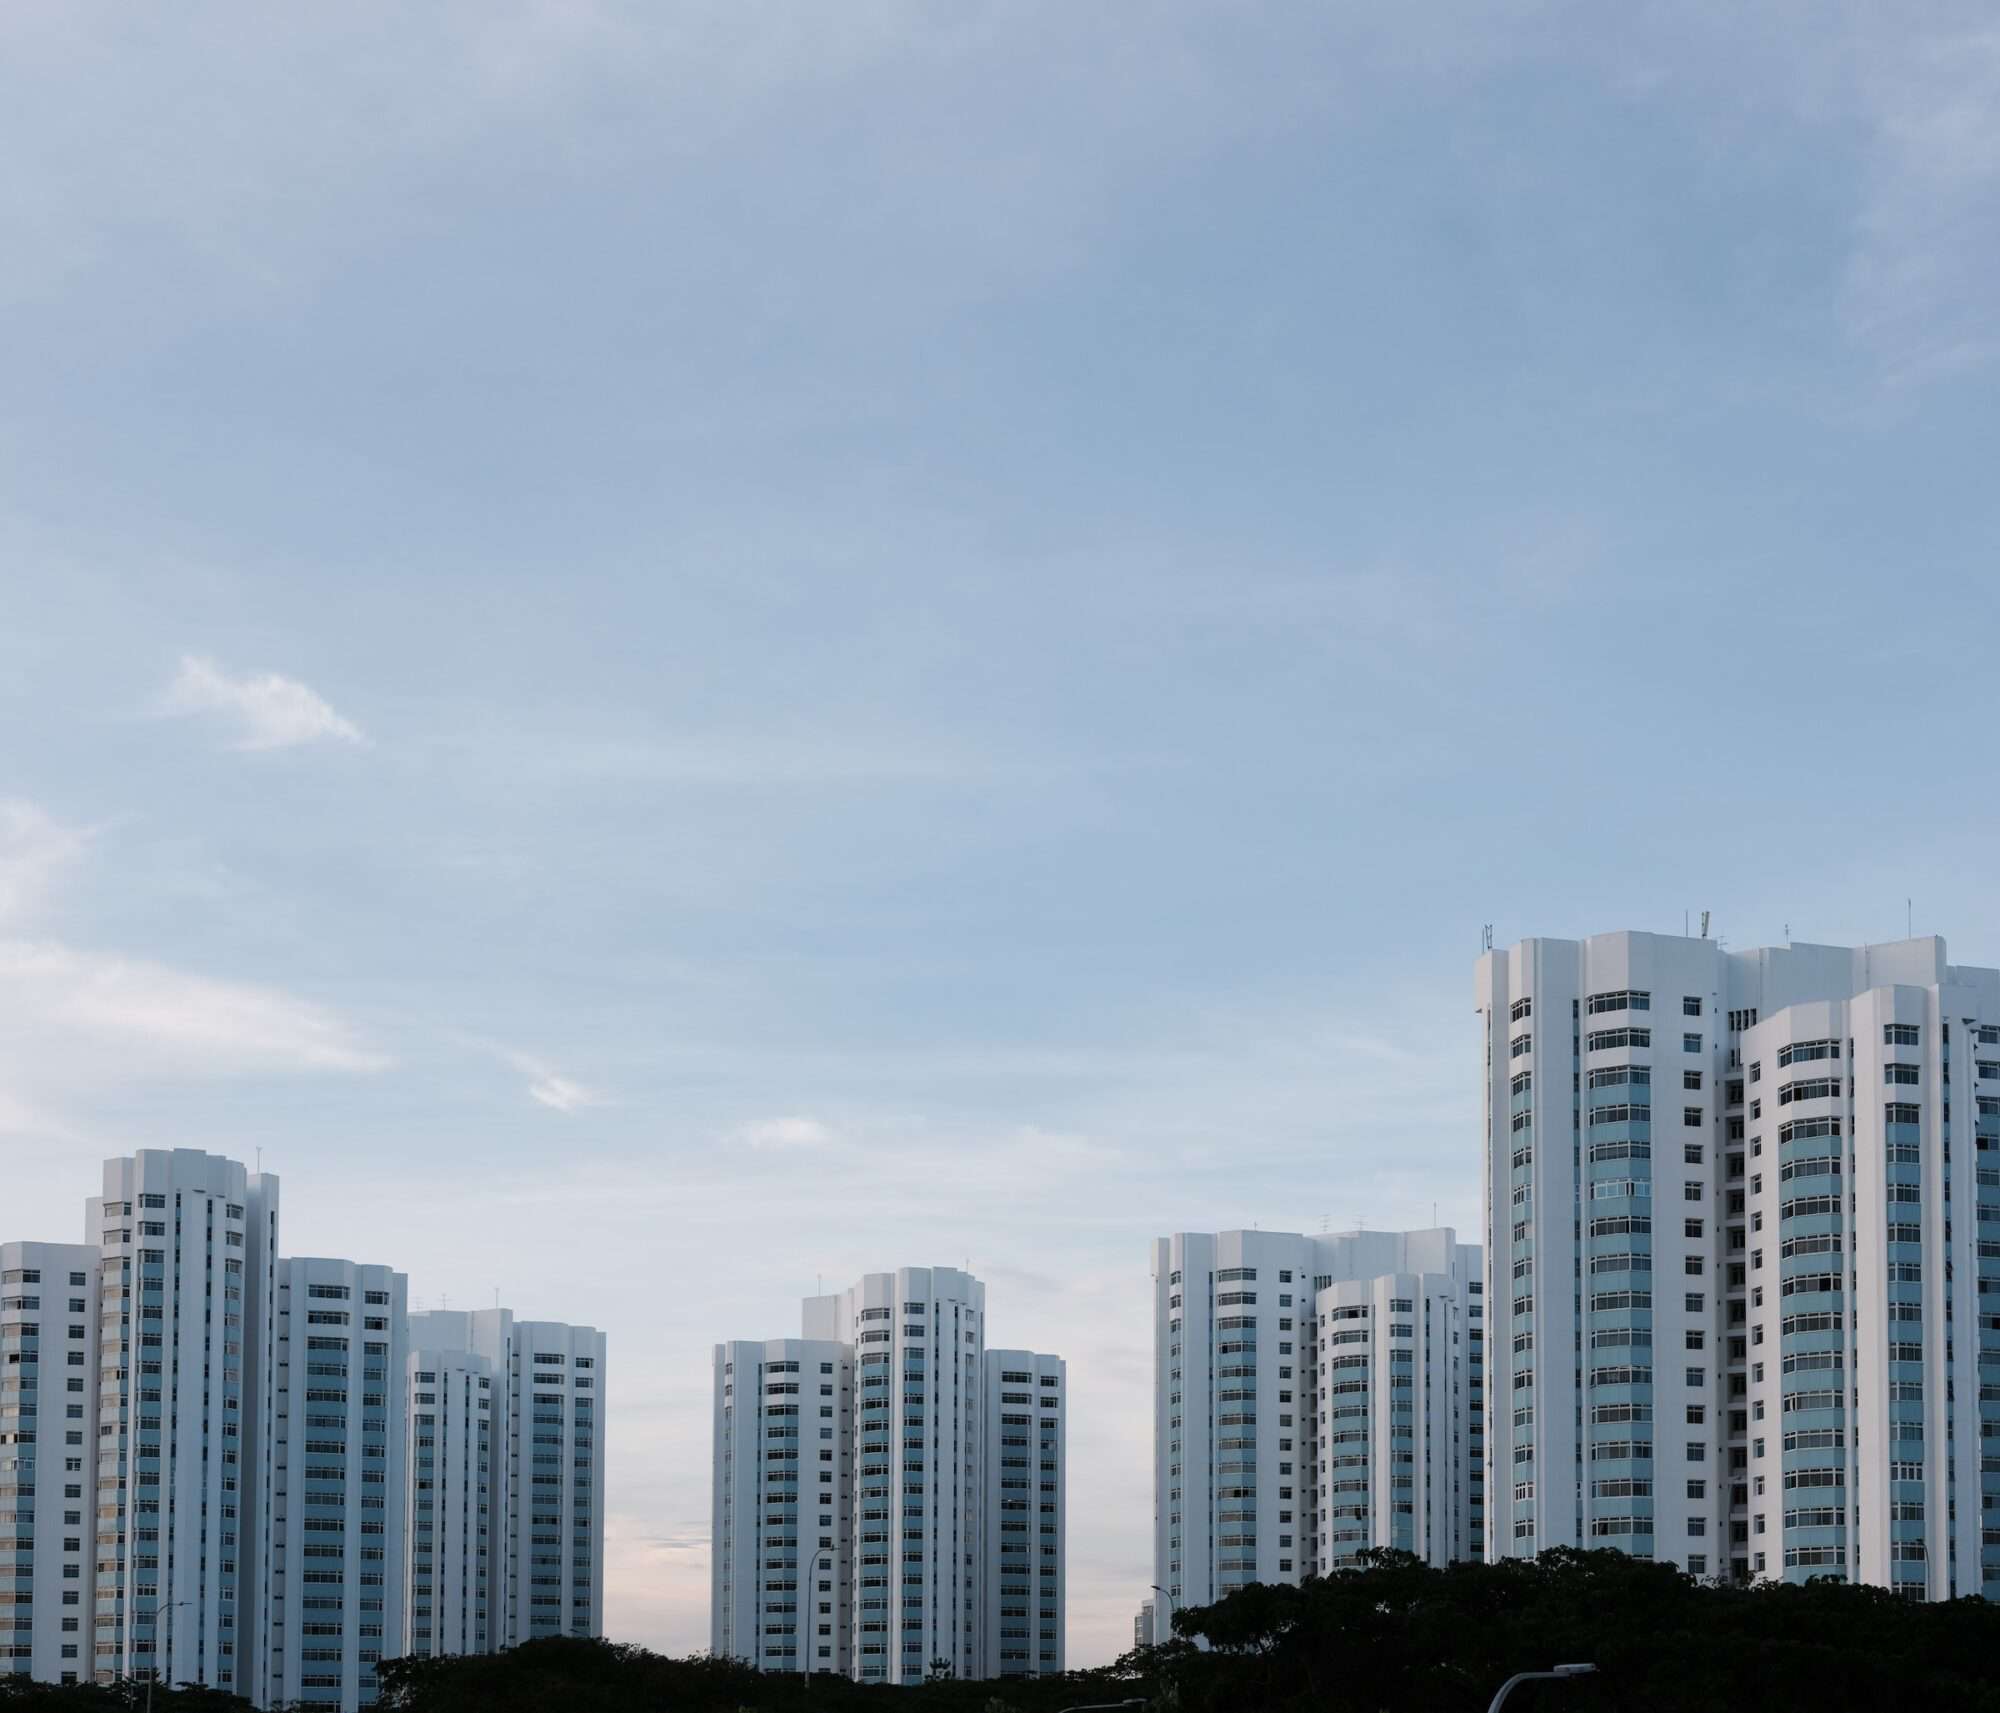 A neighbourhood of public apartment buildings in Singapore.